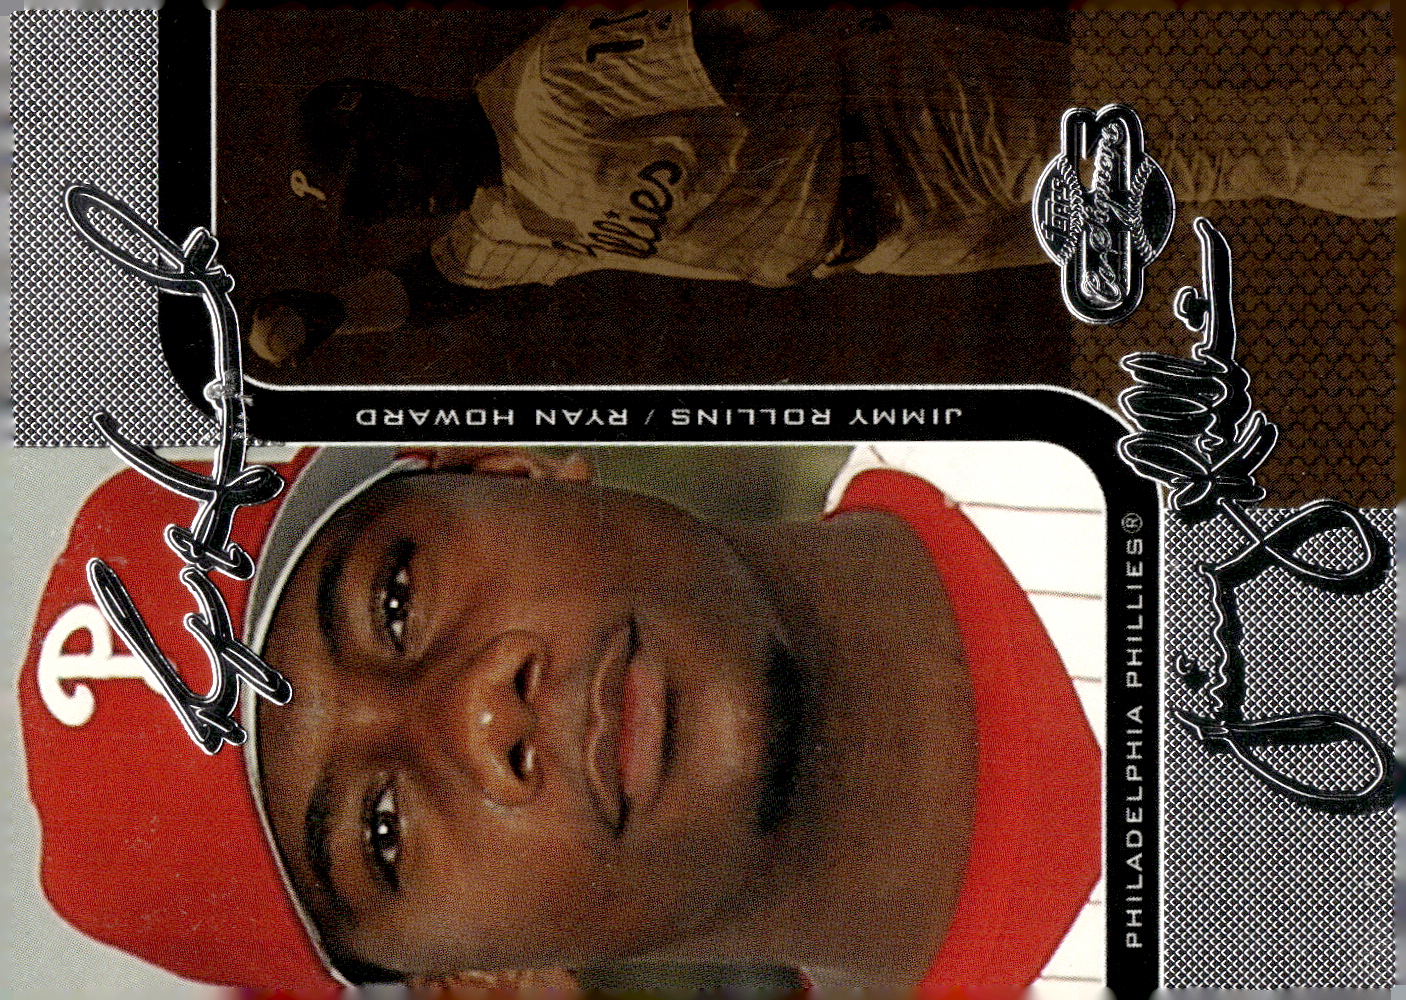 2006 Topps Co-Signers Changing Faces Silver Gold #21A Ryan Howard/Jimmy Rollins